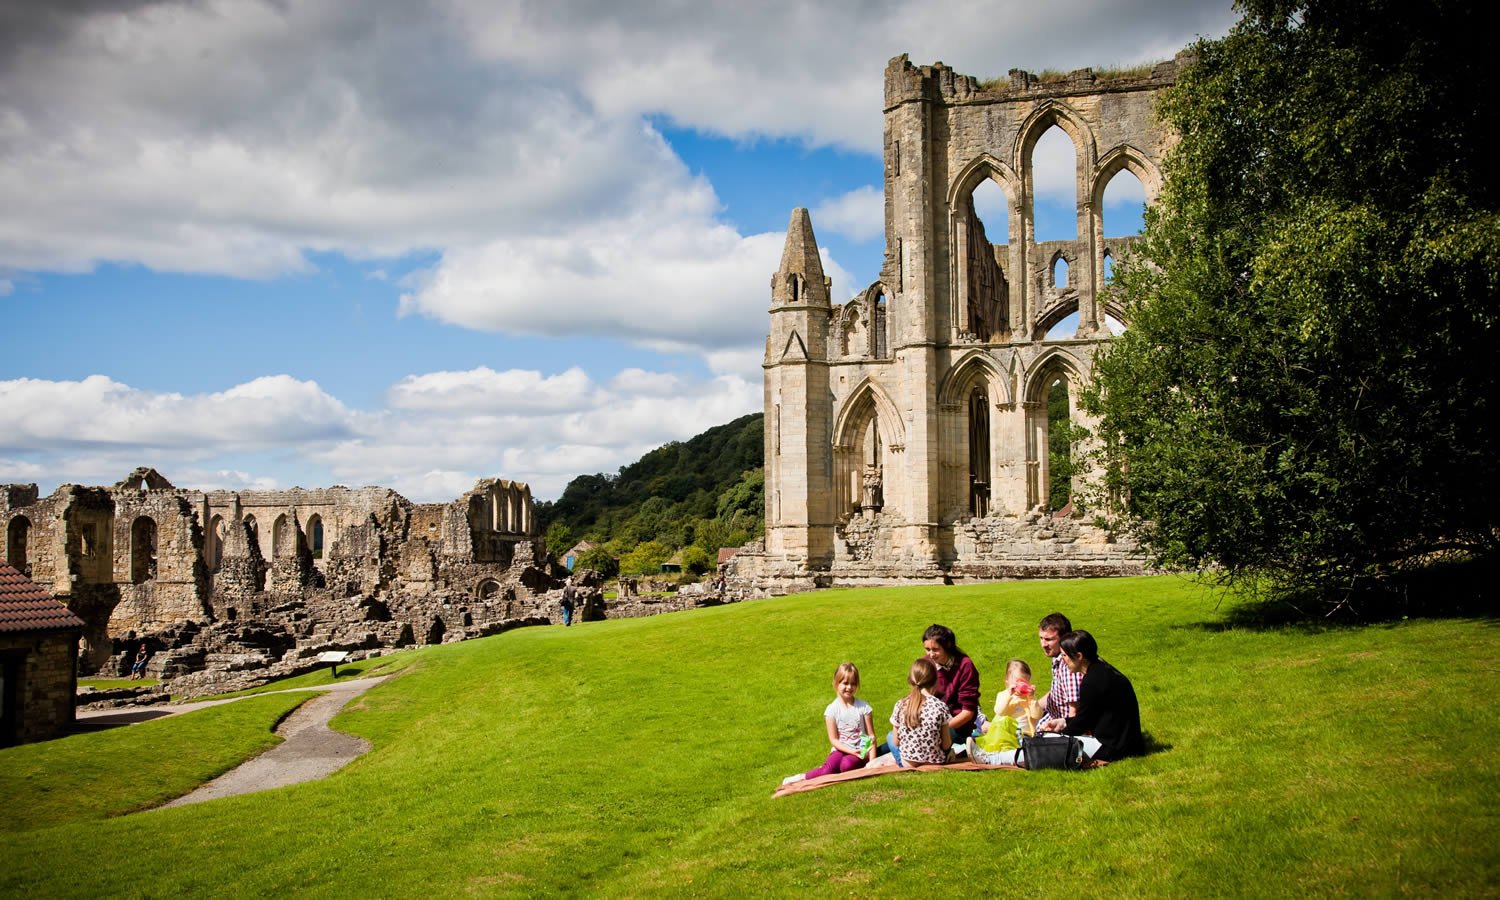 Image name Rievaulx Abbey the 14 image from the post Scottish Wars of Independence in Yorkshire in Yorkshire.com.